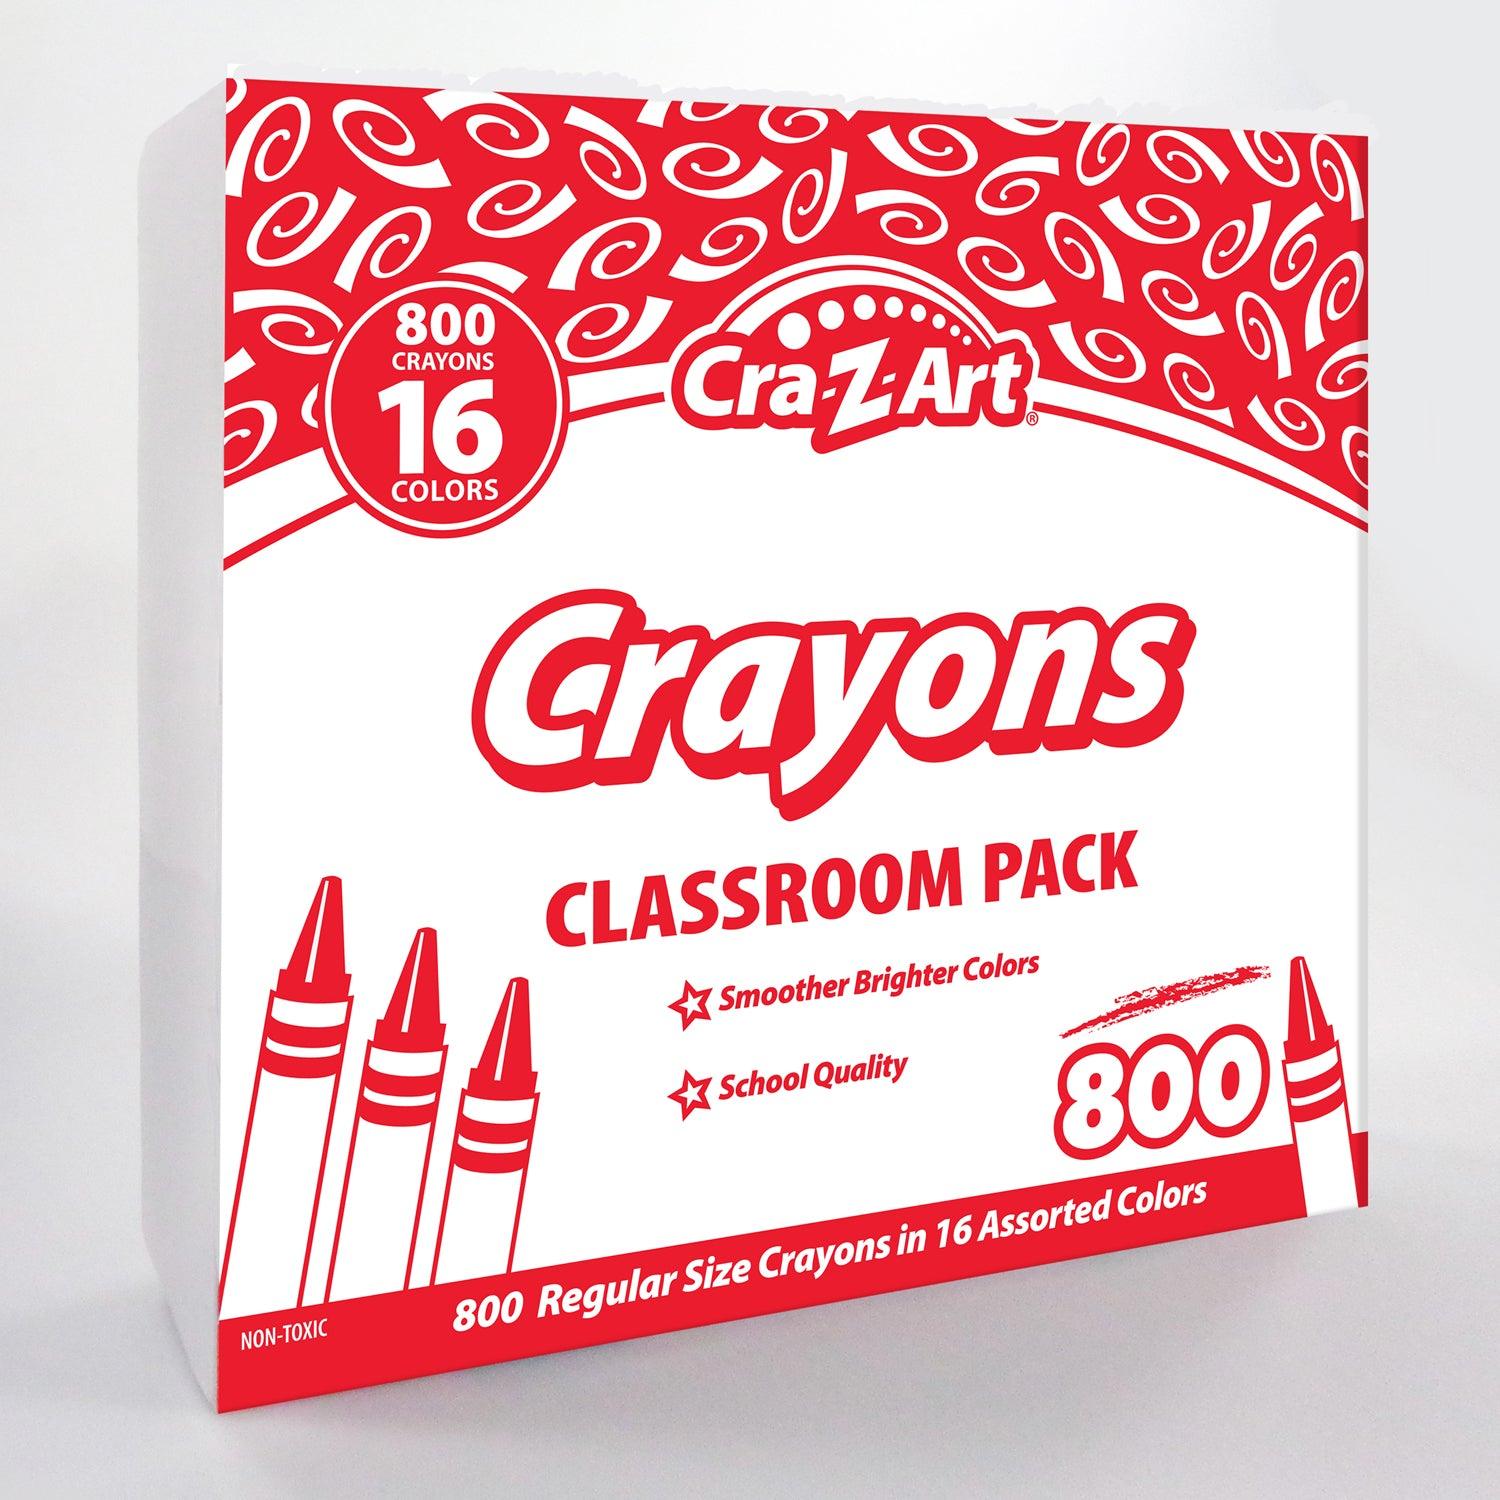 Crayon Classroom Pack, 16 Color, Box of 800 - Loomini